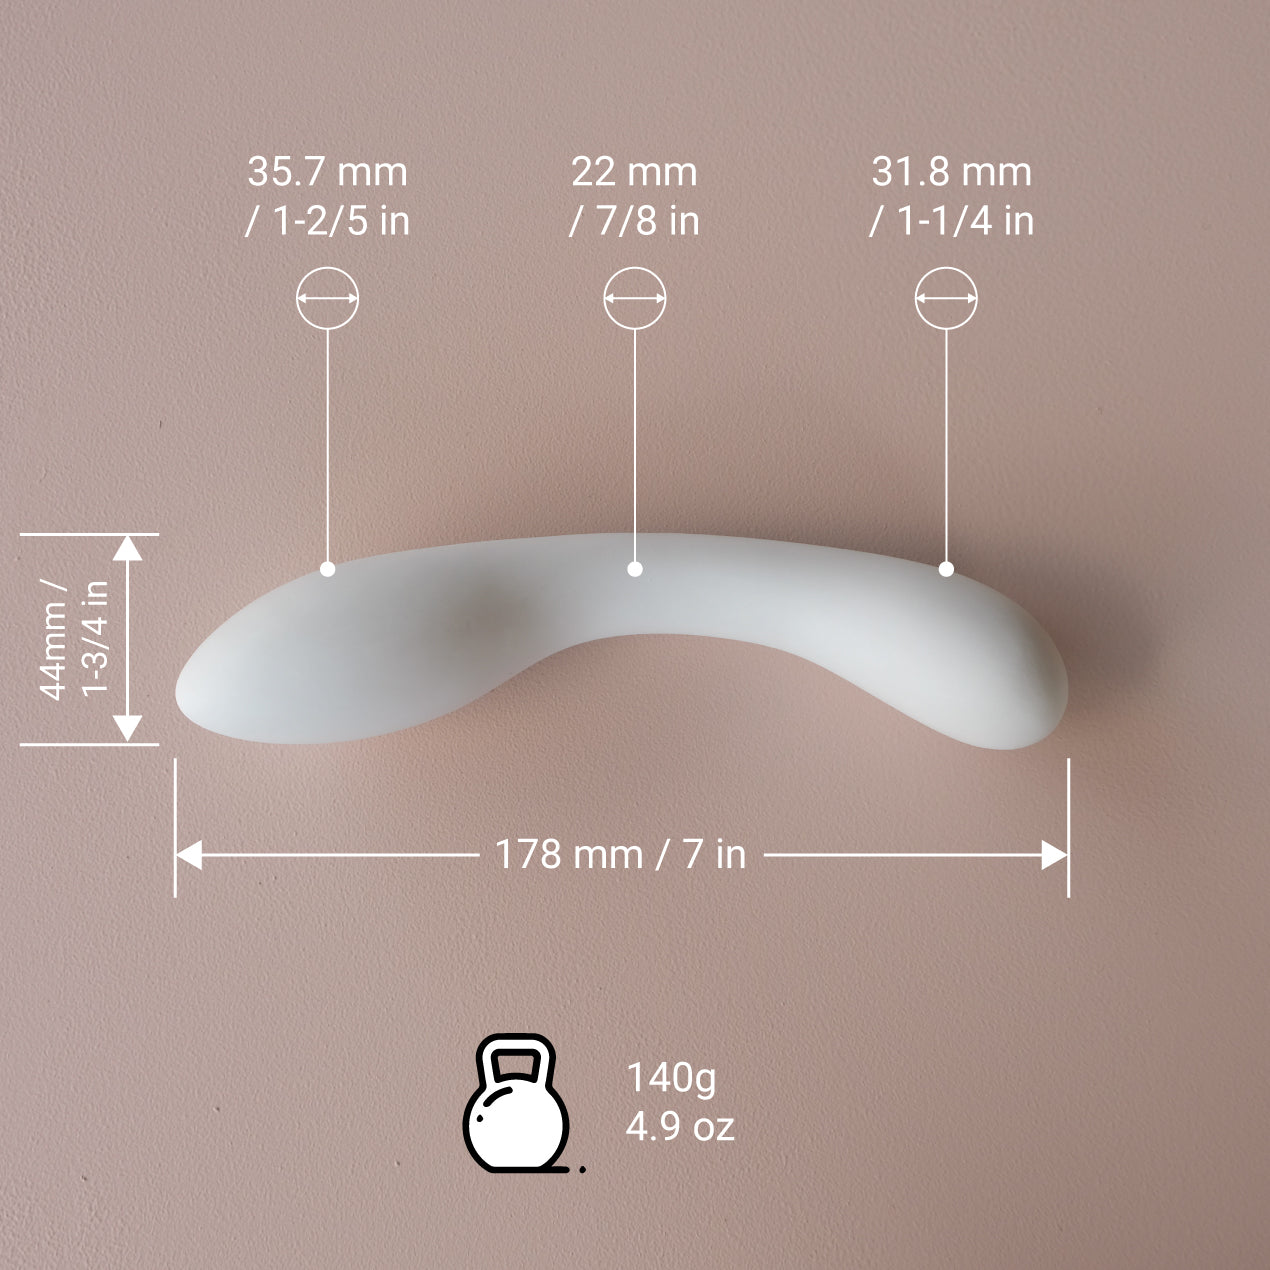 Dimensions and Weight of our Body Safe Porcelain Dildo